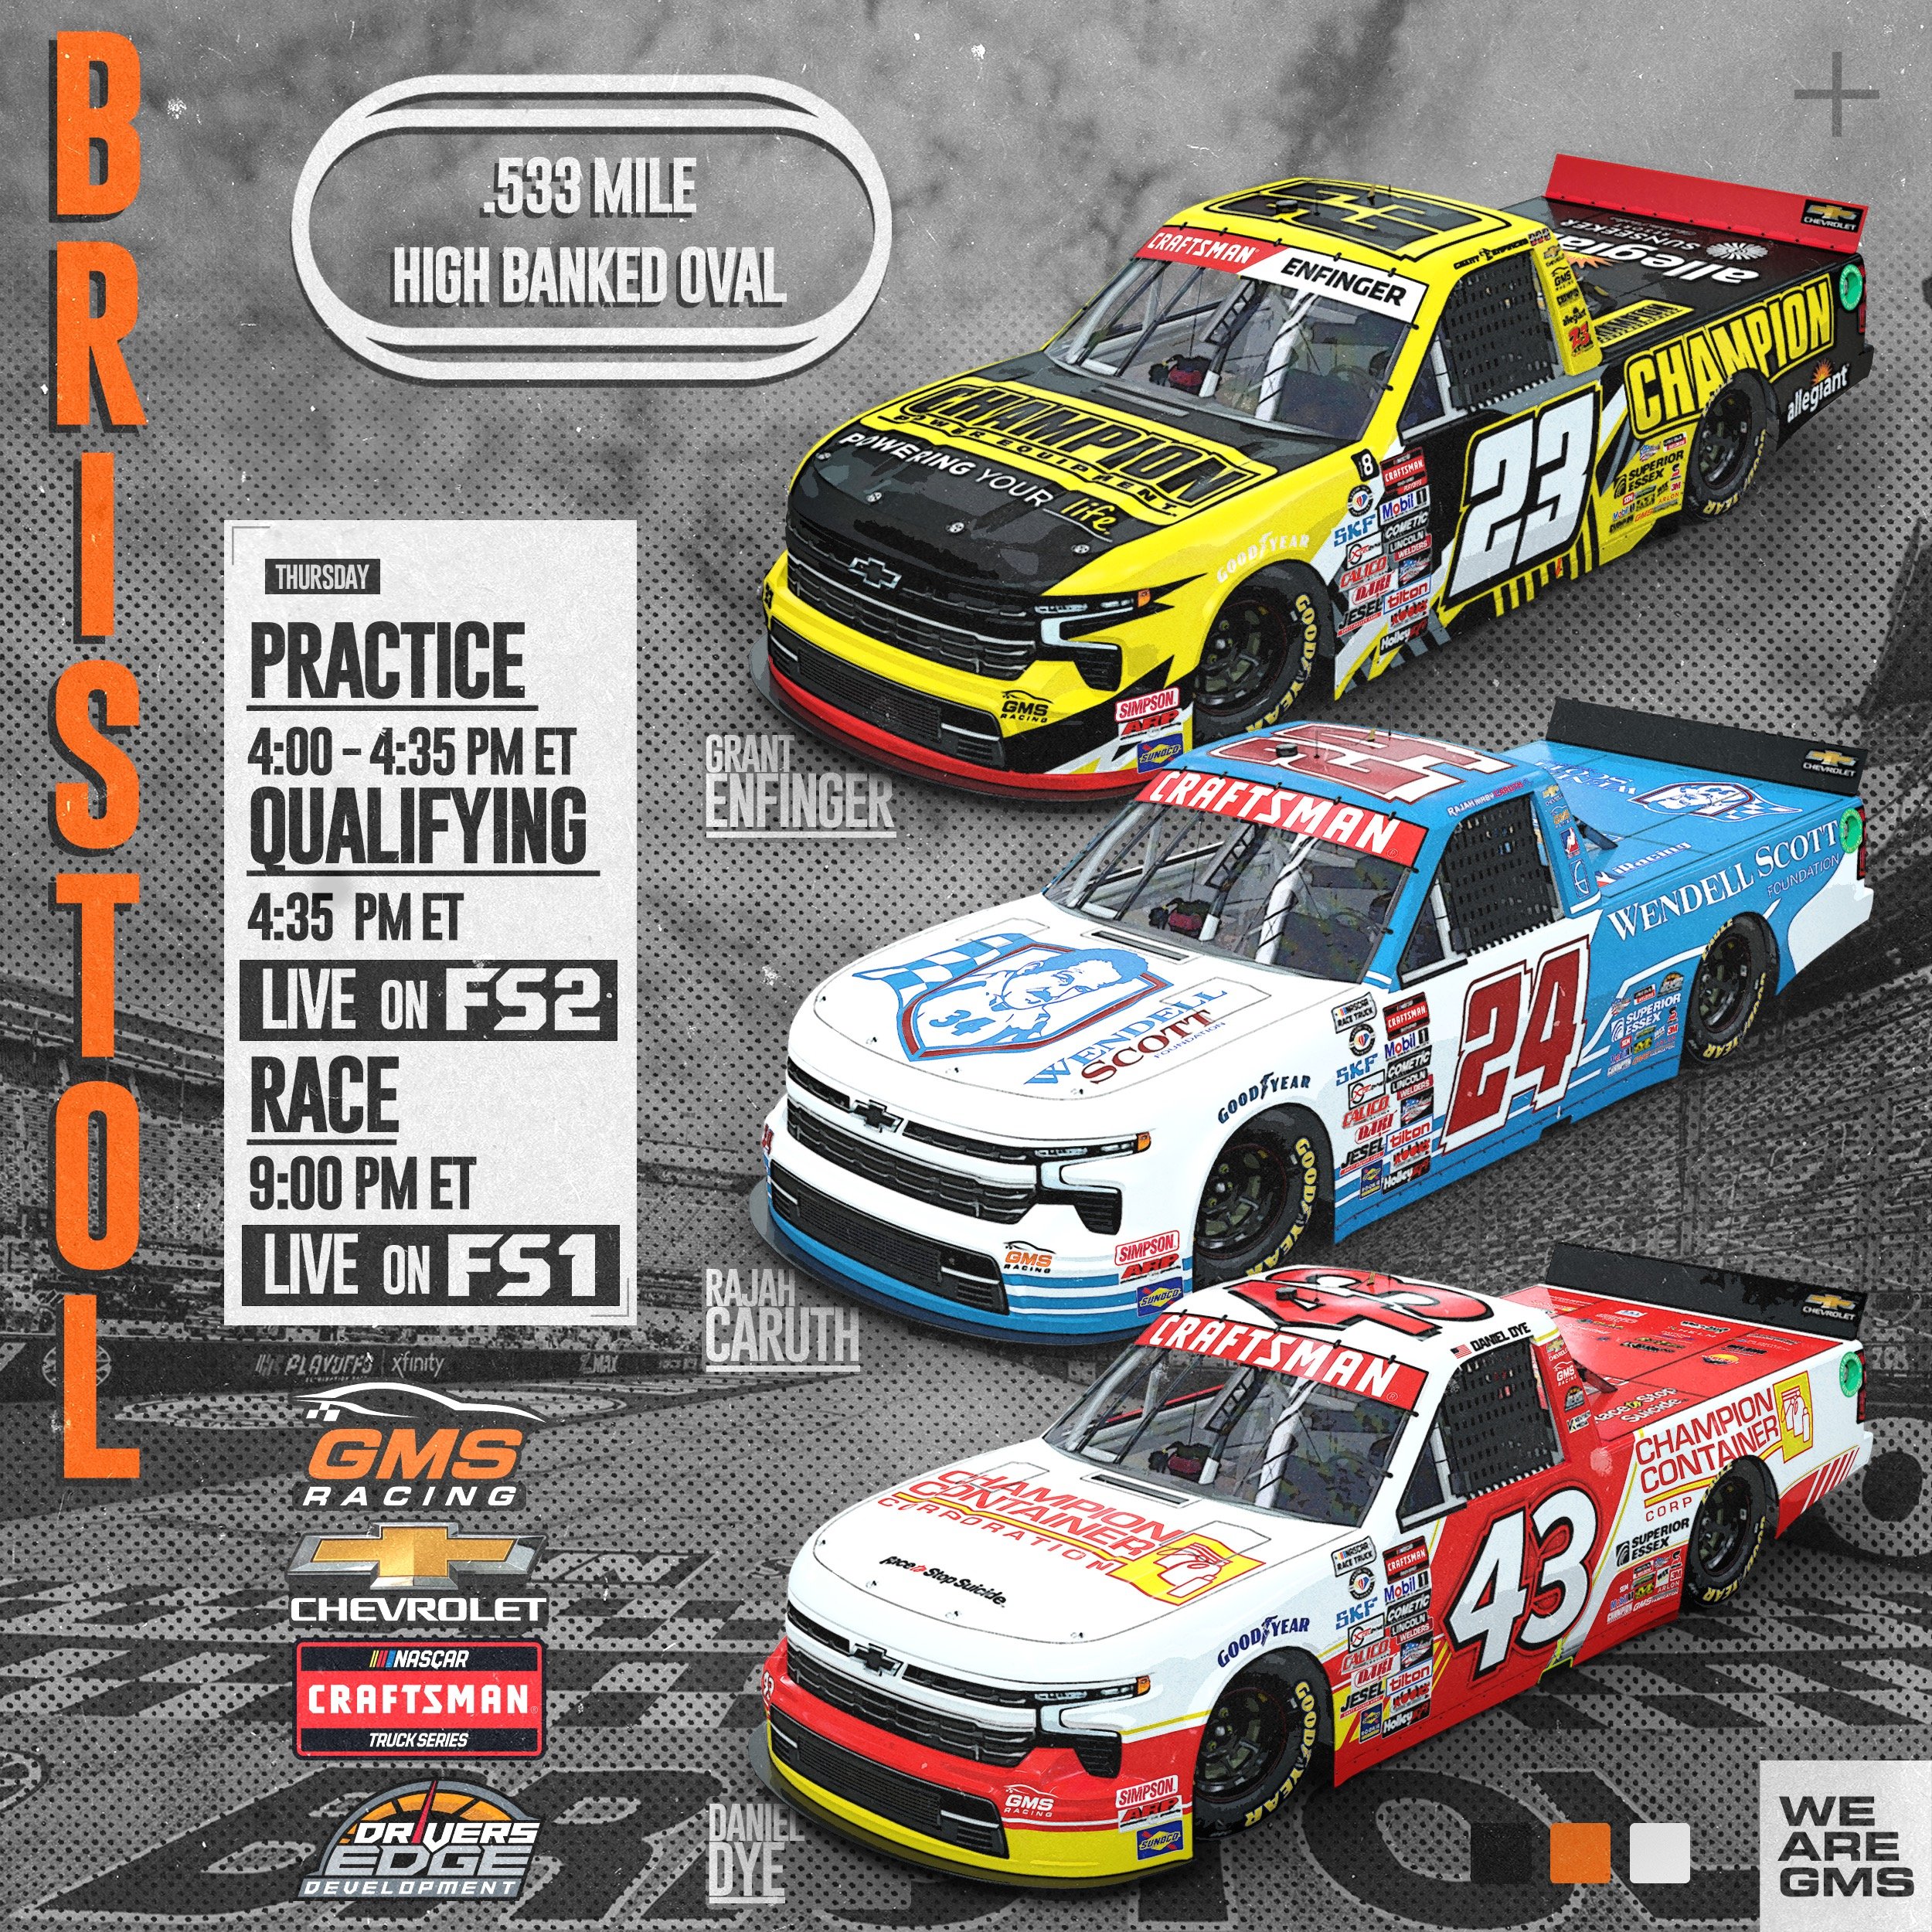 Bristol Motor Speedway UNOH 200 Presented by Ohio Logistics Race Preview — GMS Racing